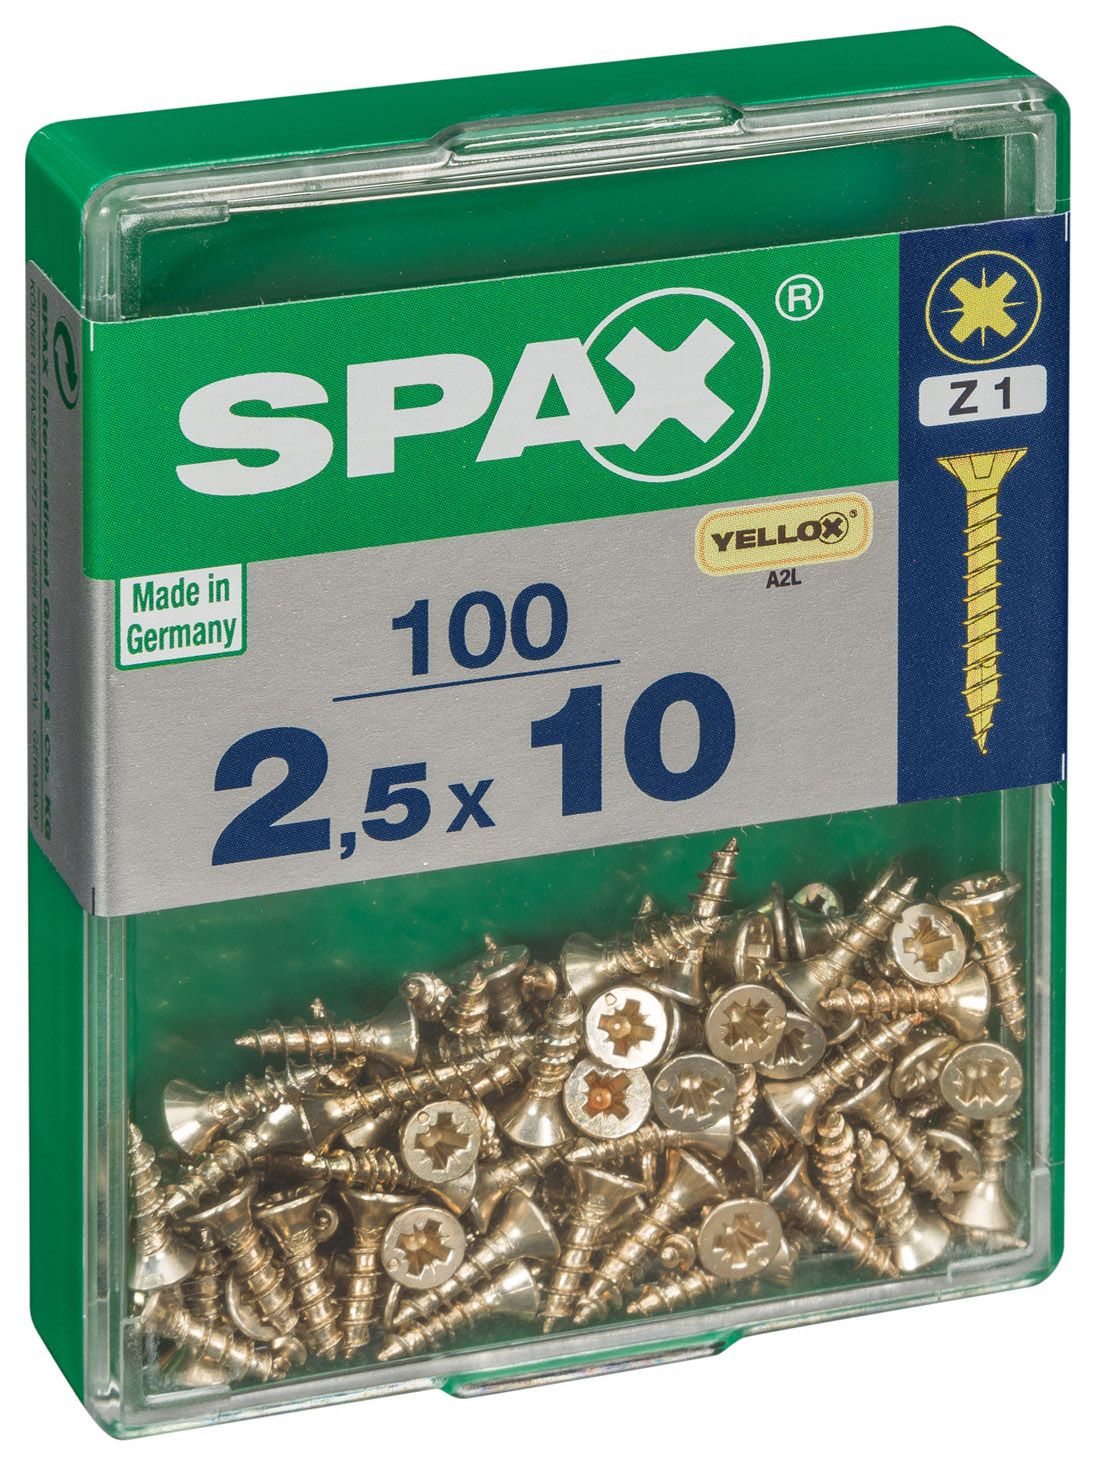 Image of Spax Pz Countersunk Yellox Screws - 2.5x10mm Pack Of 100